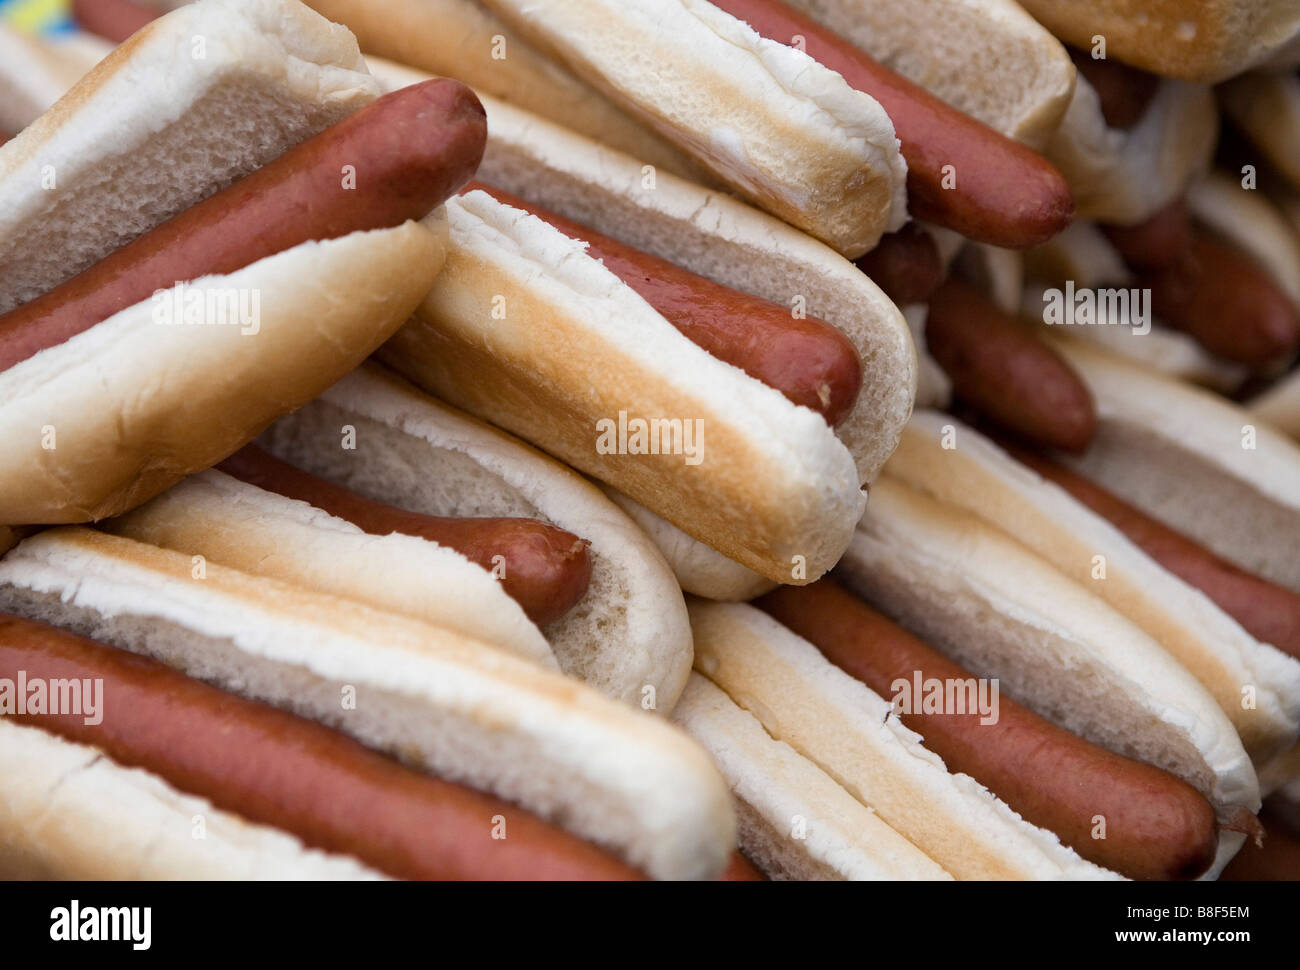 A pile of cooked hot dogs in buns. Stock Photo